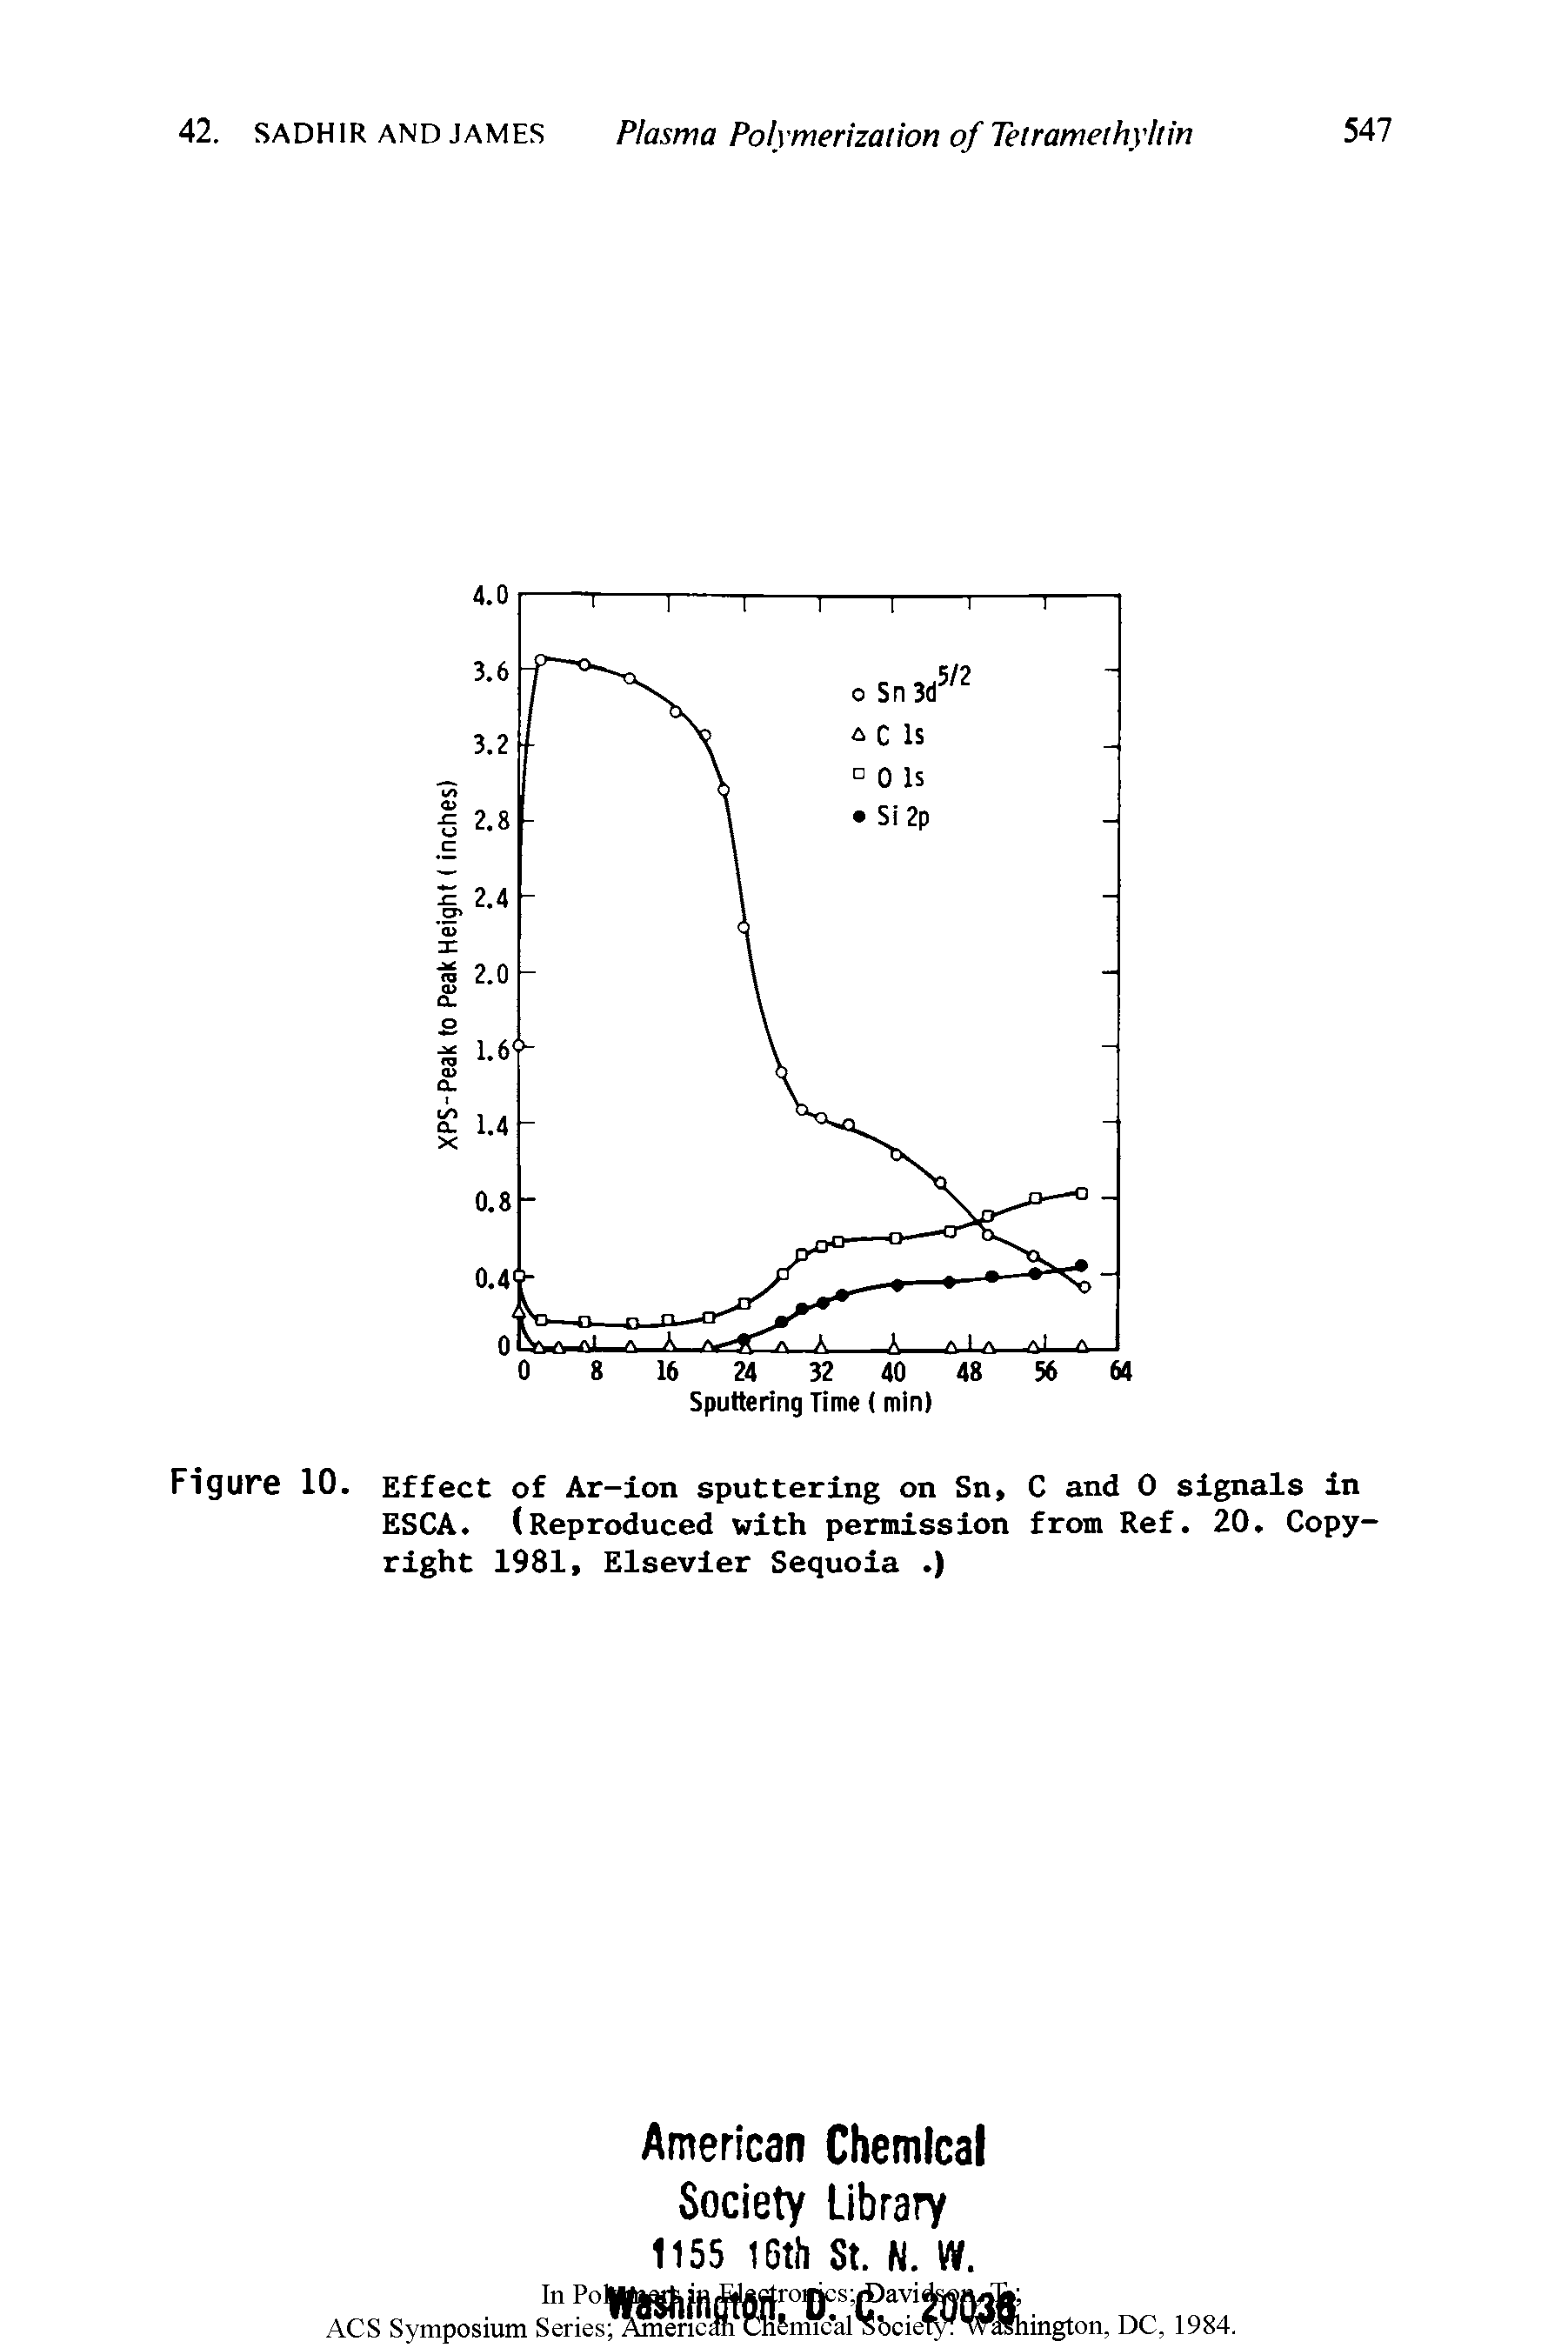 Figure 10. Effect of Ar-ion sputtering on Sn, C and 0 signals in ESCA. (Reproduced with permission from Ref. 20. Copyright 1981, Elsevier Sequoia. )...